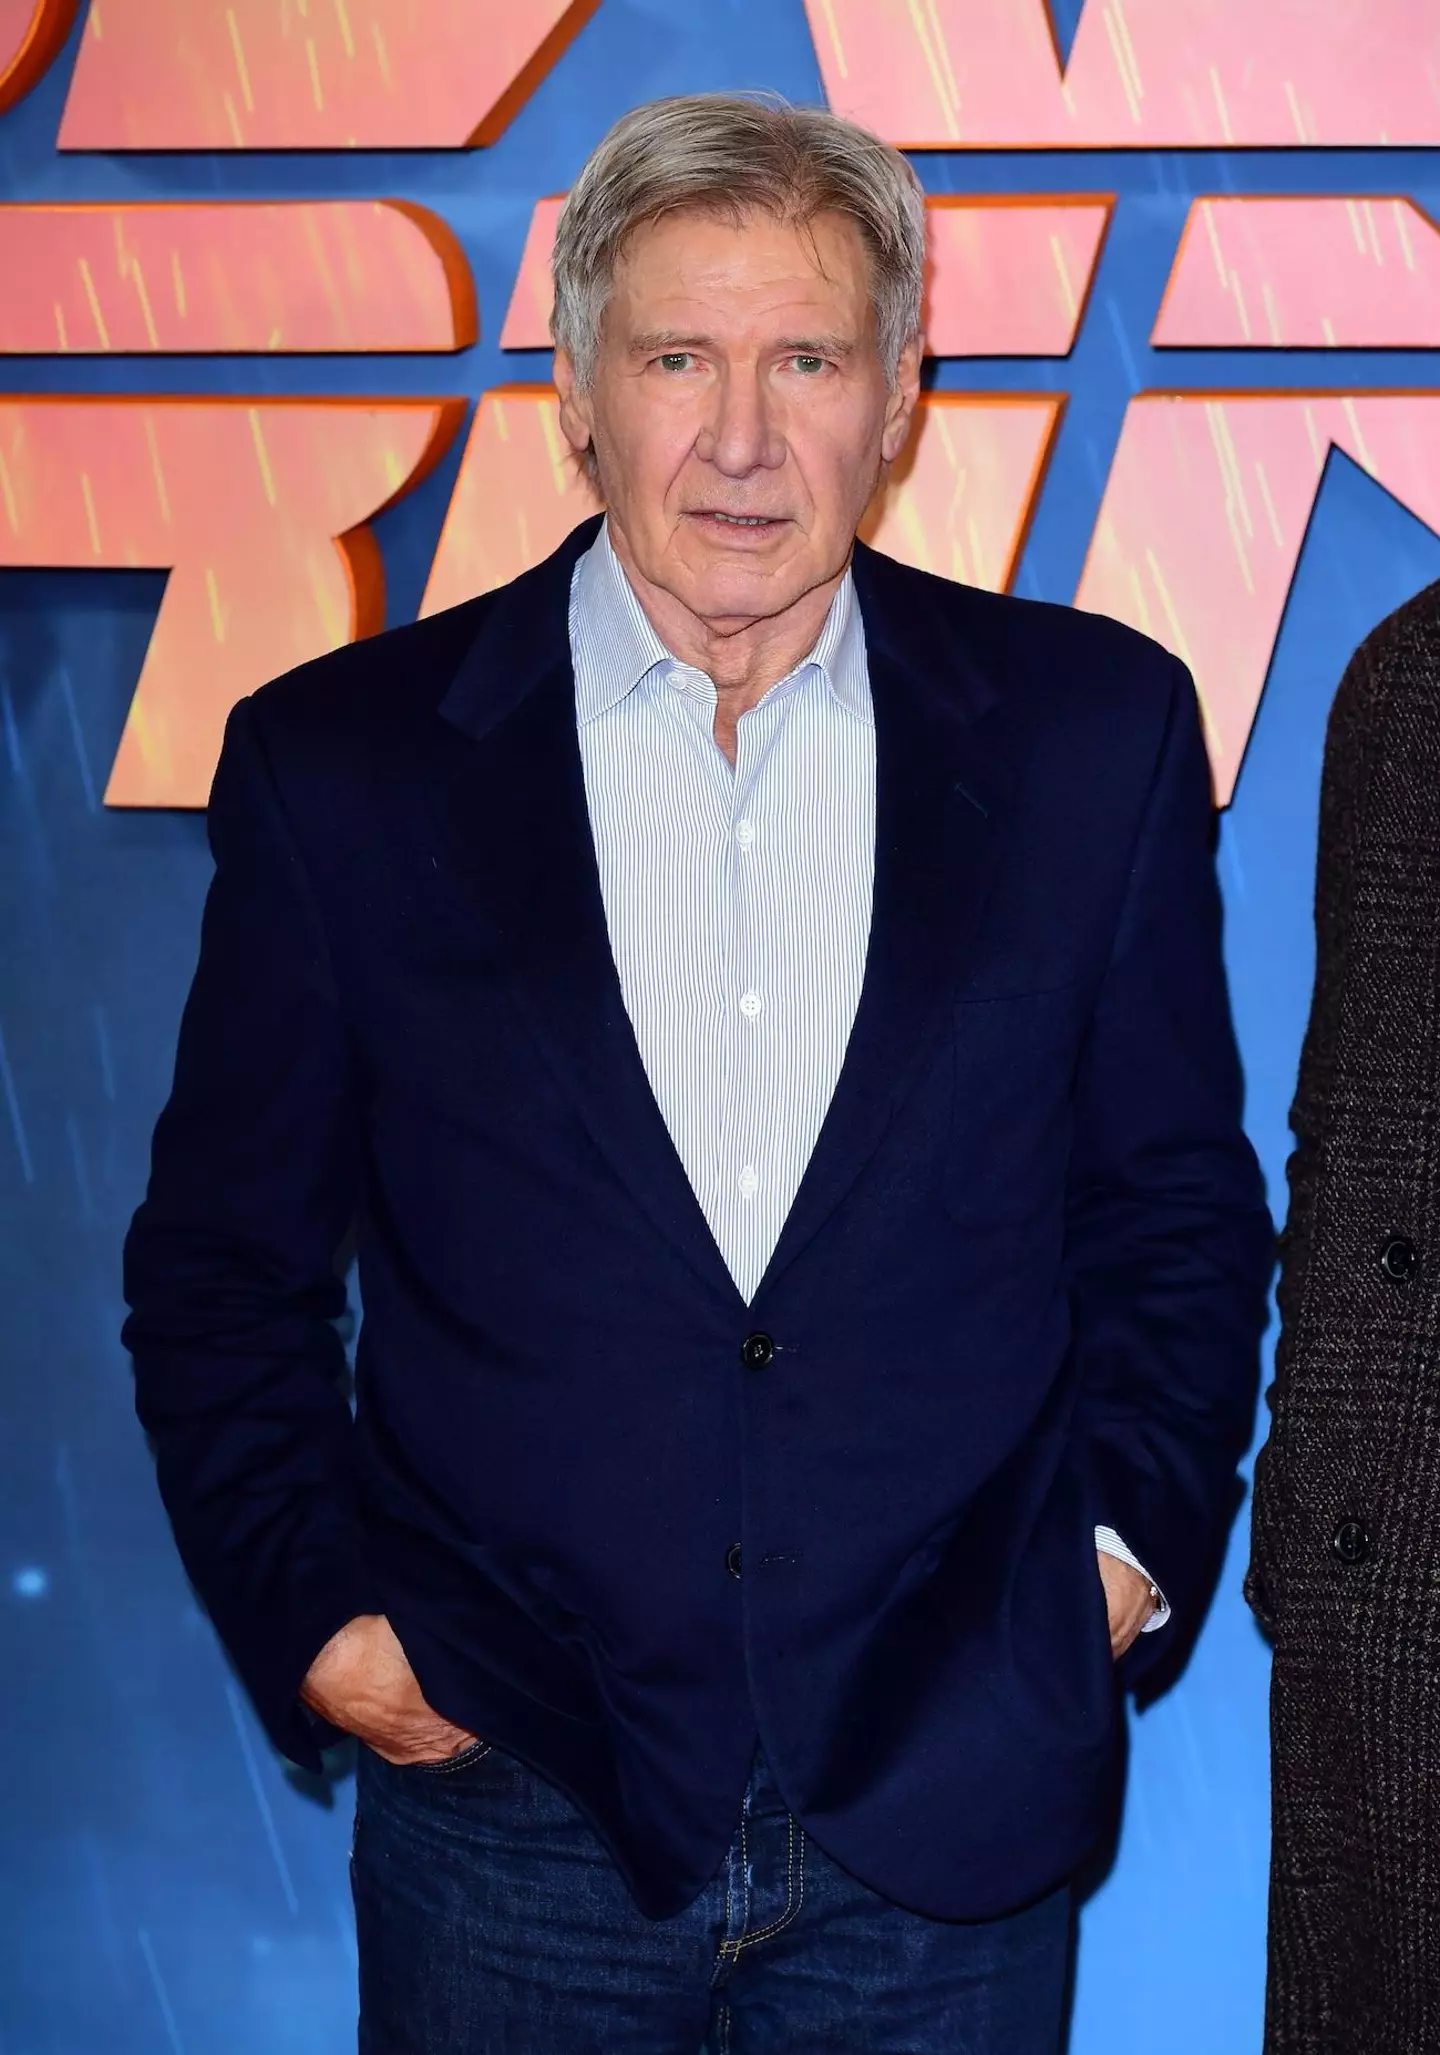 Hollywood legend Harrison Ford has defended the de-aging technology used in Indiana Jones and the Dial of Destiny.